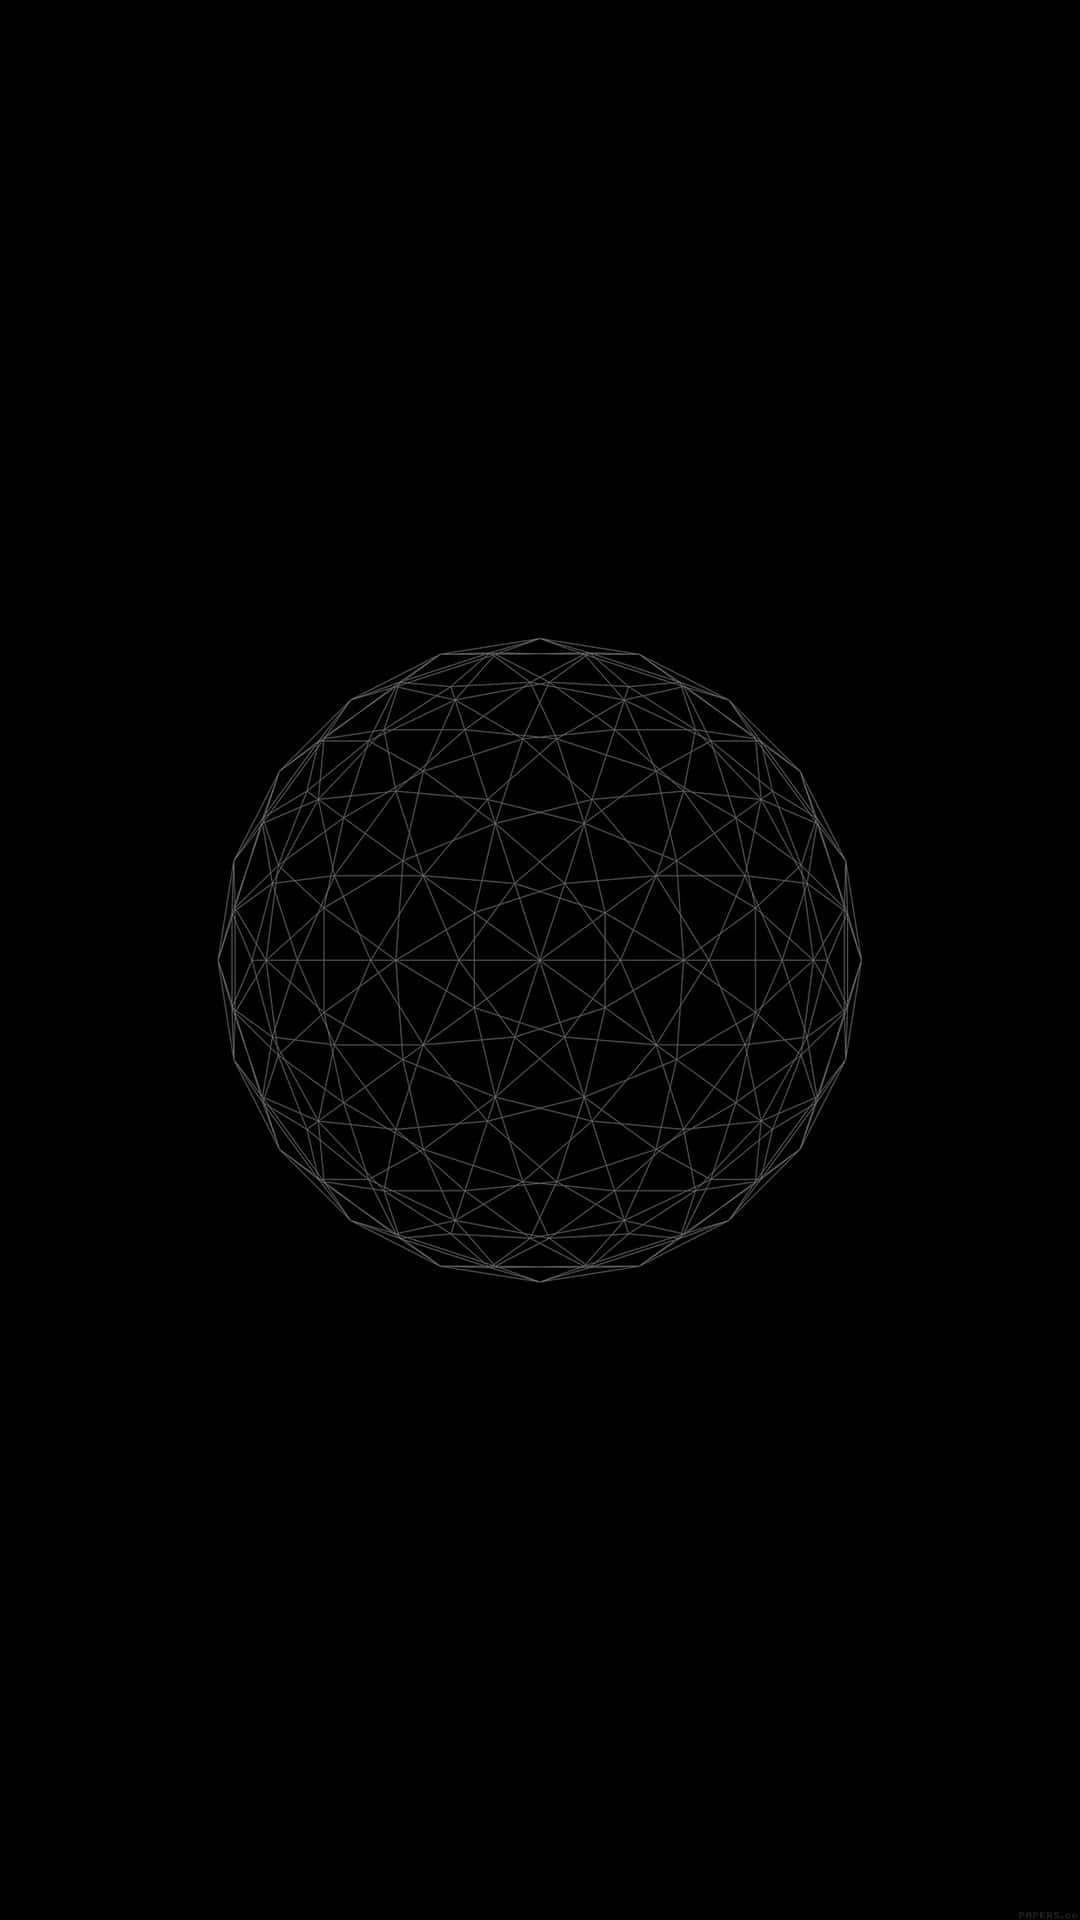 Abstract Geometric Sphere Black Background Wallpaper